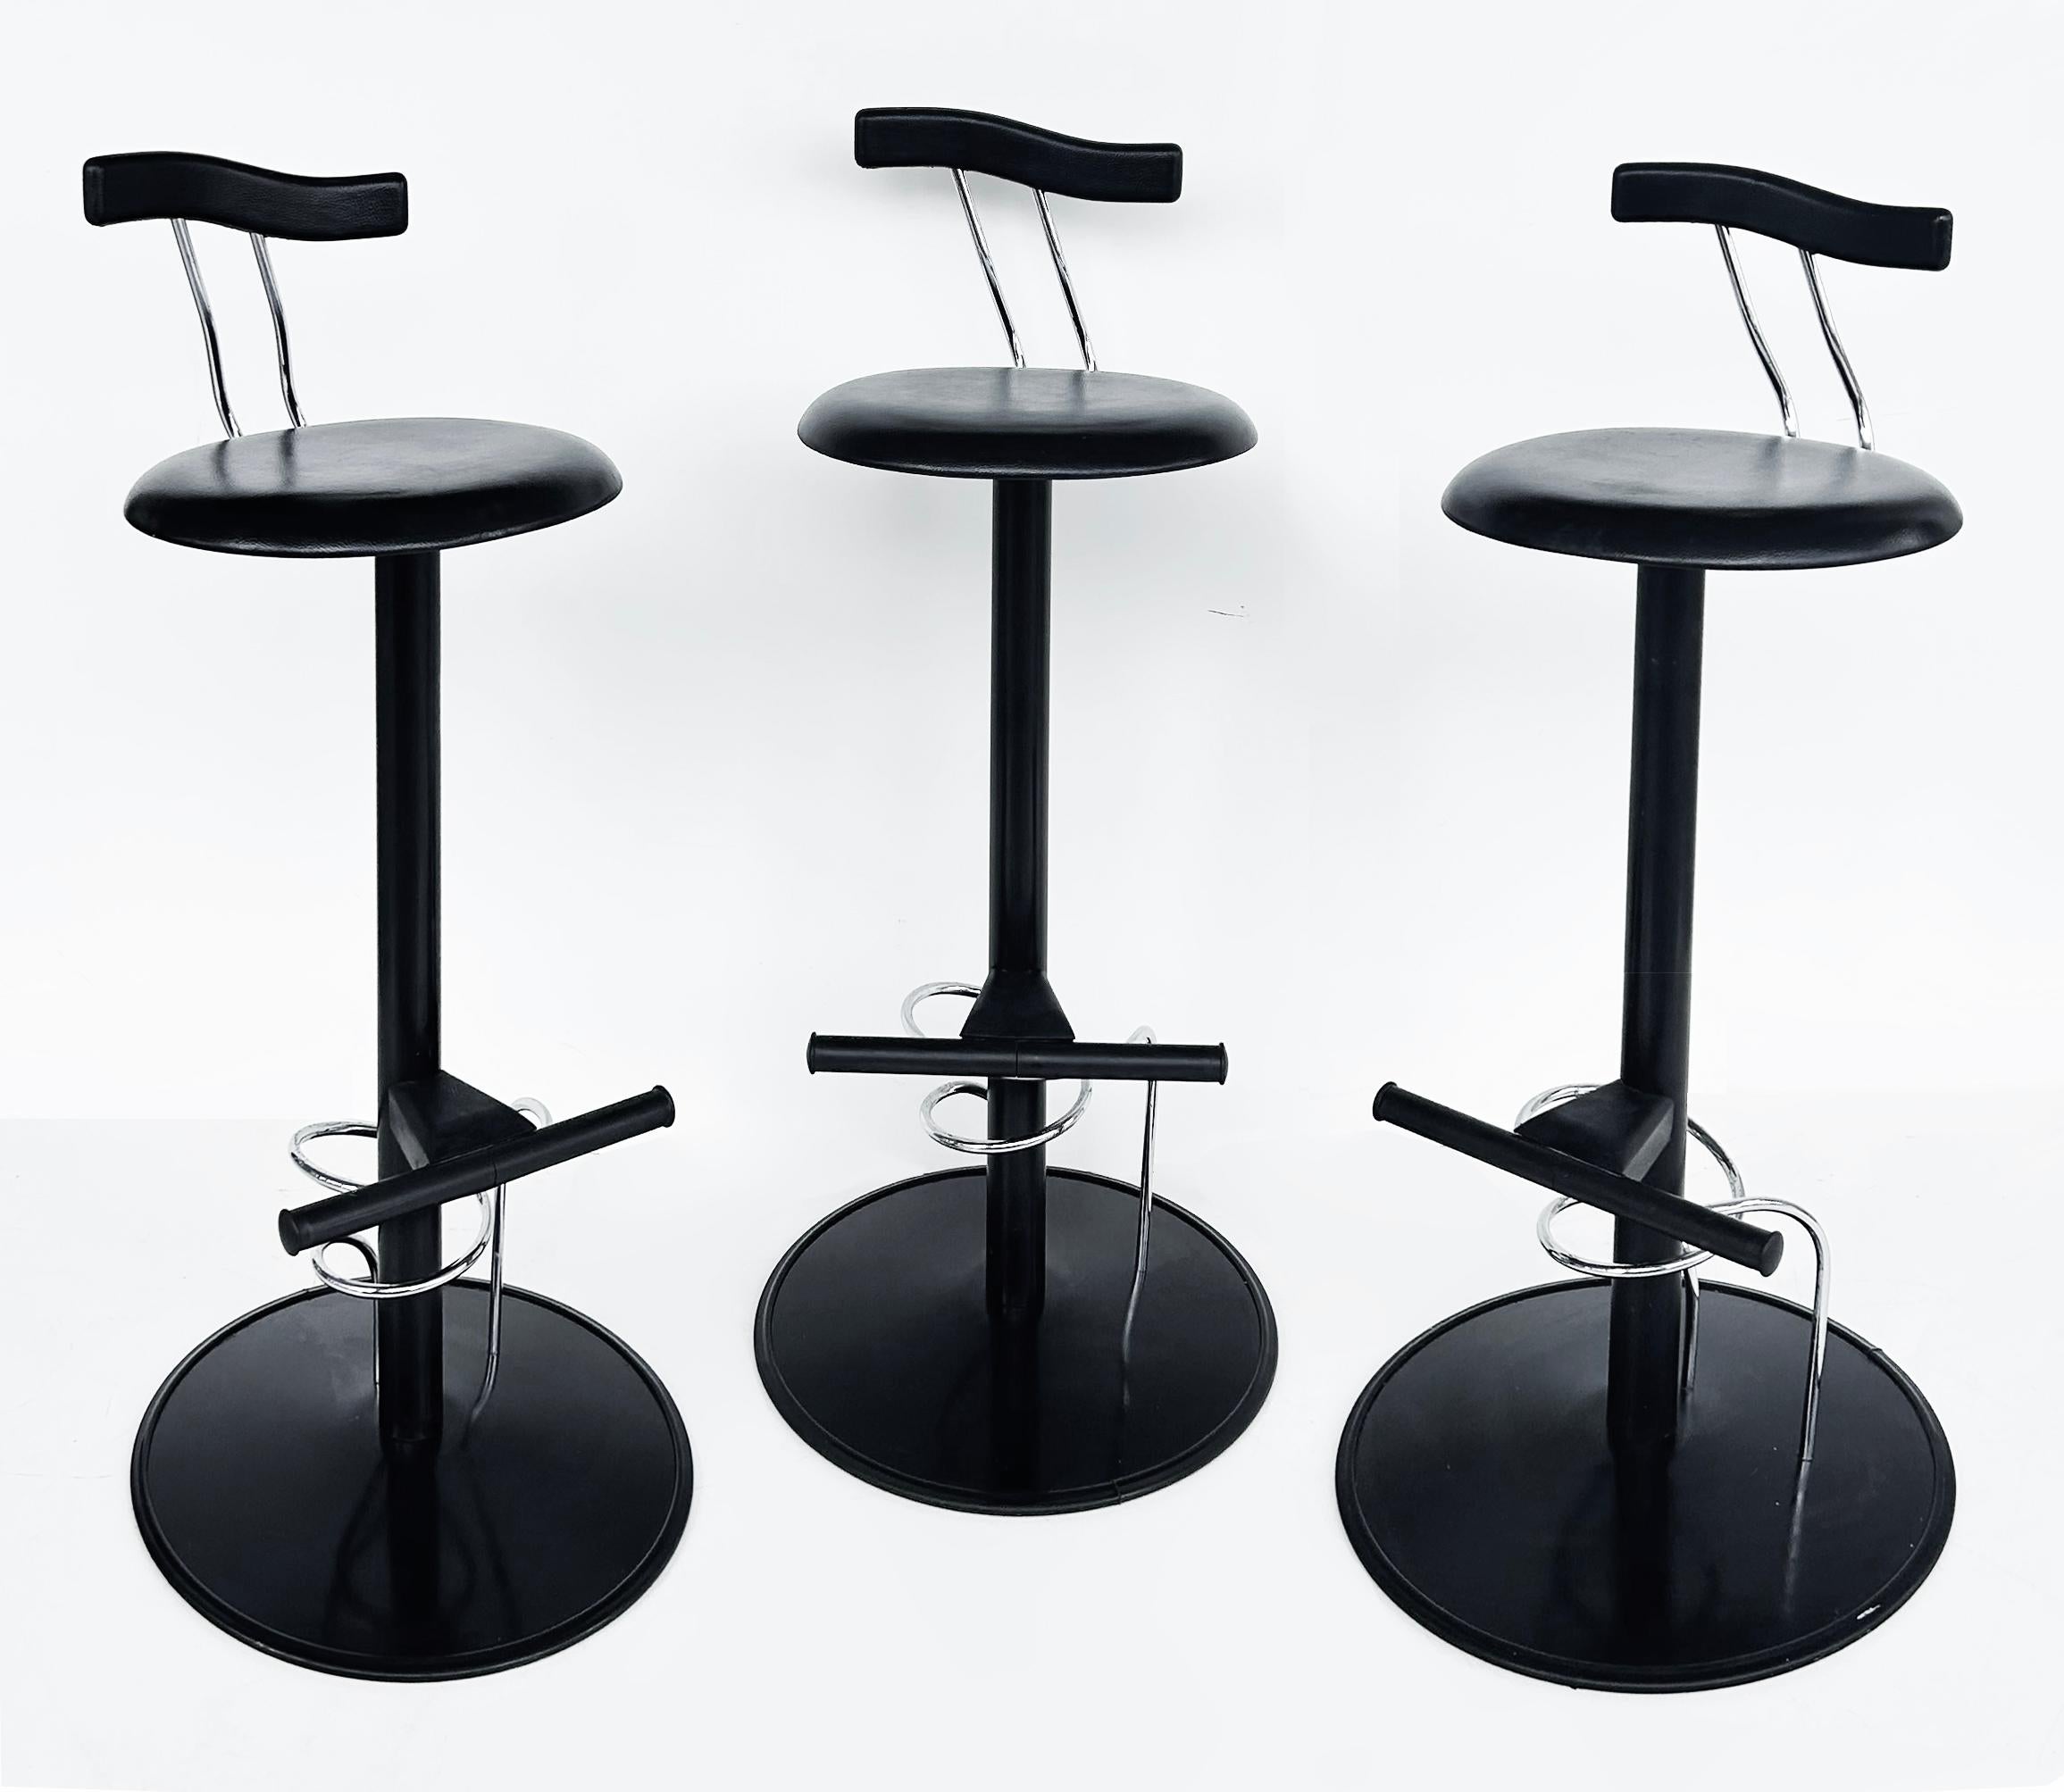 Ettore Sottsass Post-Modern Memphis Milano Style Bar Stools - Set (3)

Offered for sale is a set of three post-modern Memphis Milano-style bar stools designed by Ettore Sottsass.  Made of black lacquered steel with black molded rubber seats and